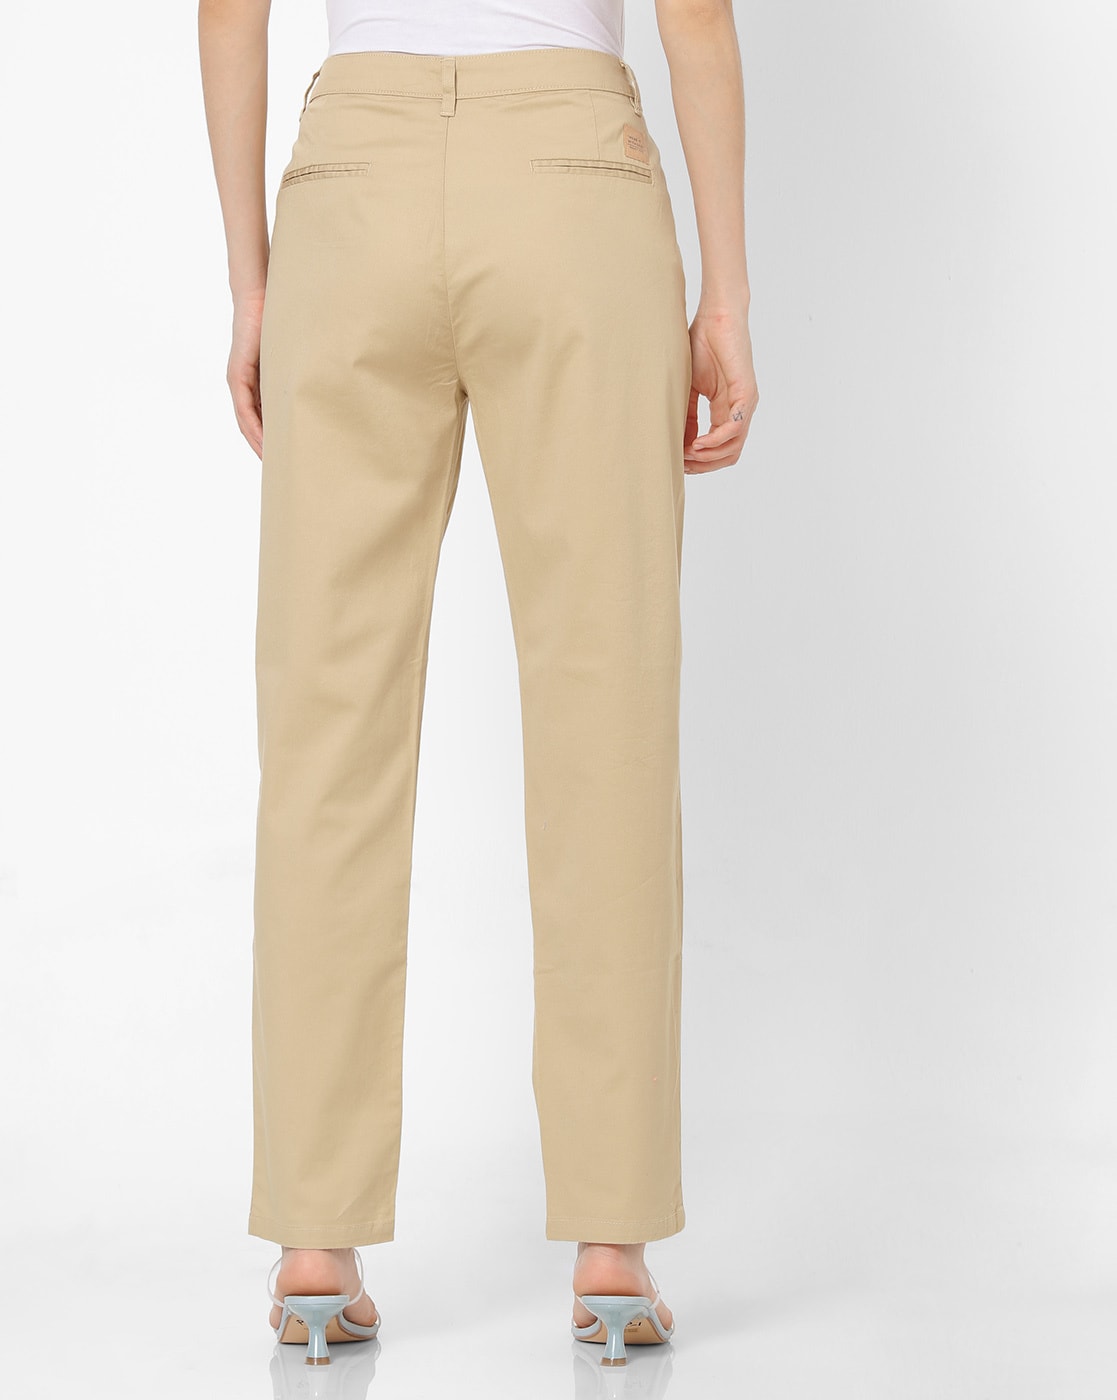 United Colors of Benetton IN ALL OVER PATTERN WITH ELASTICATED WAIST -  Trousers - grey - Zalando.de